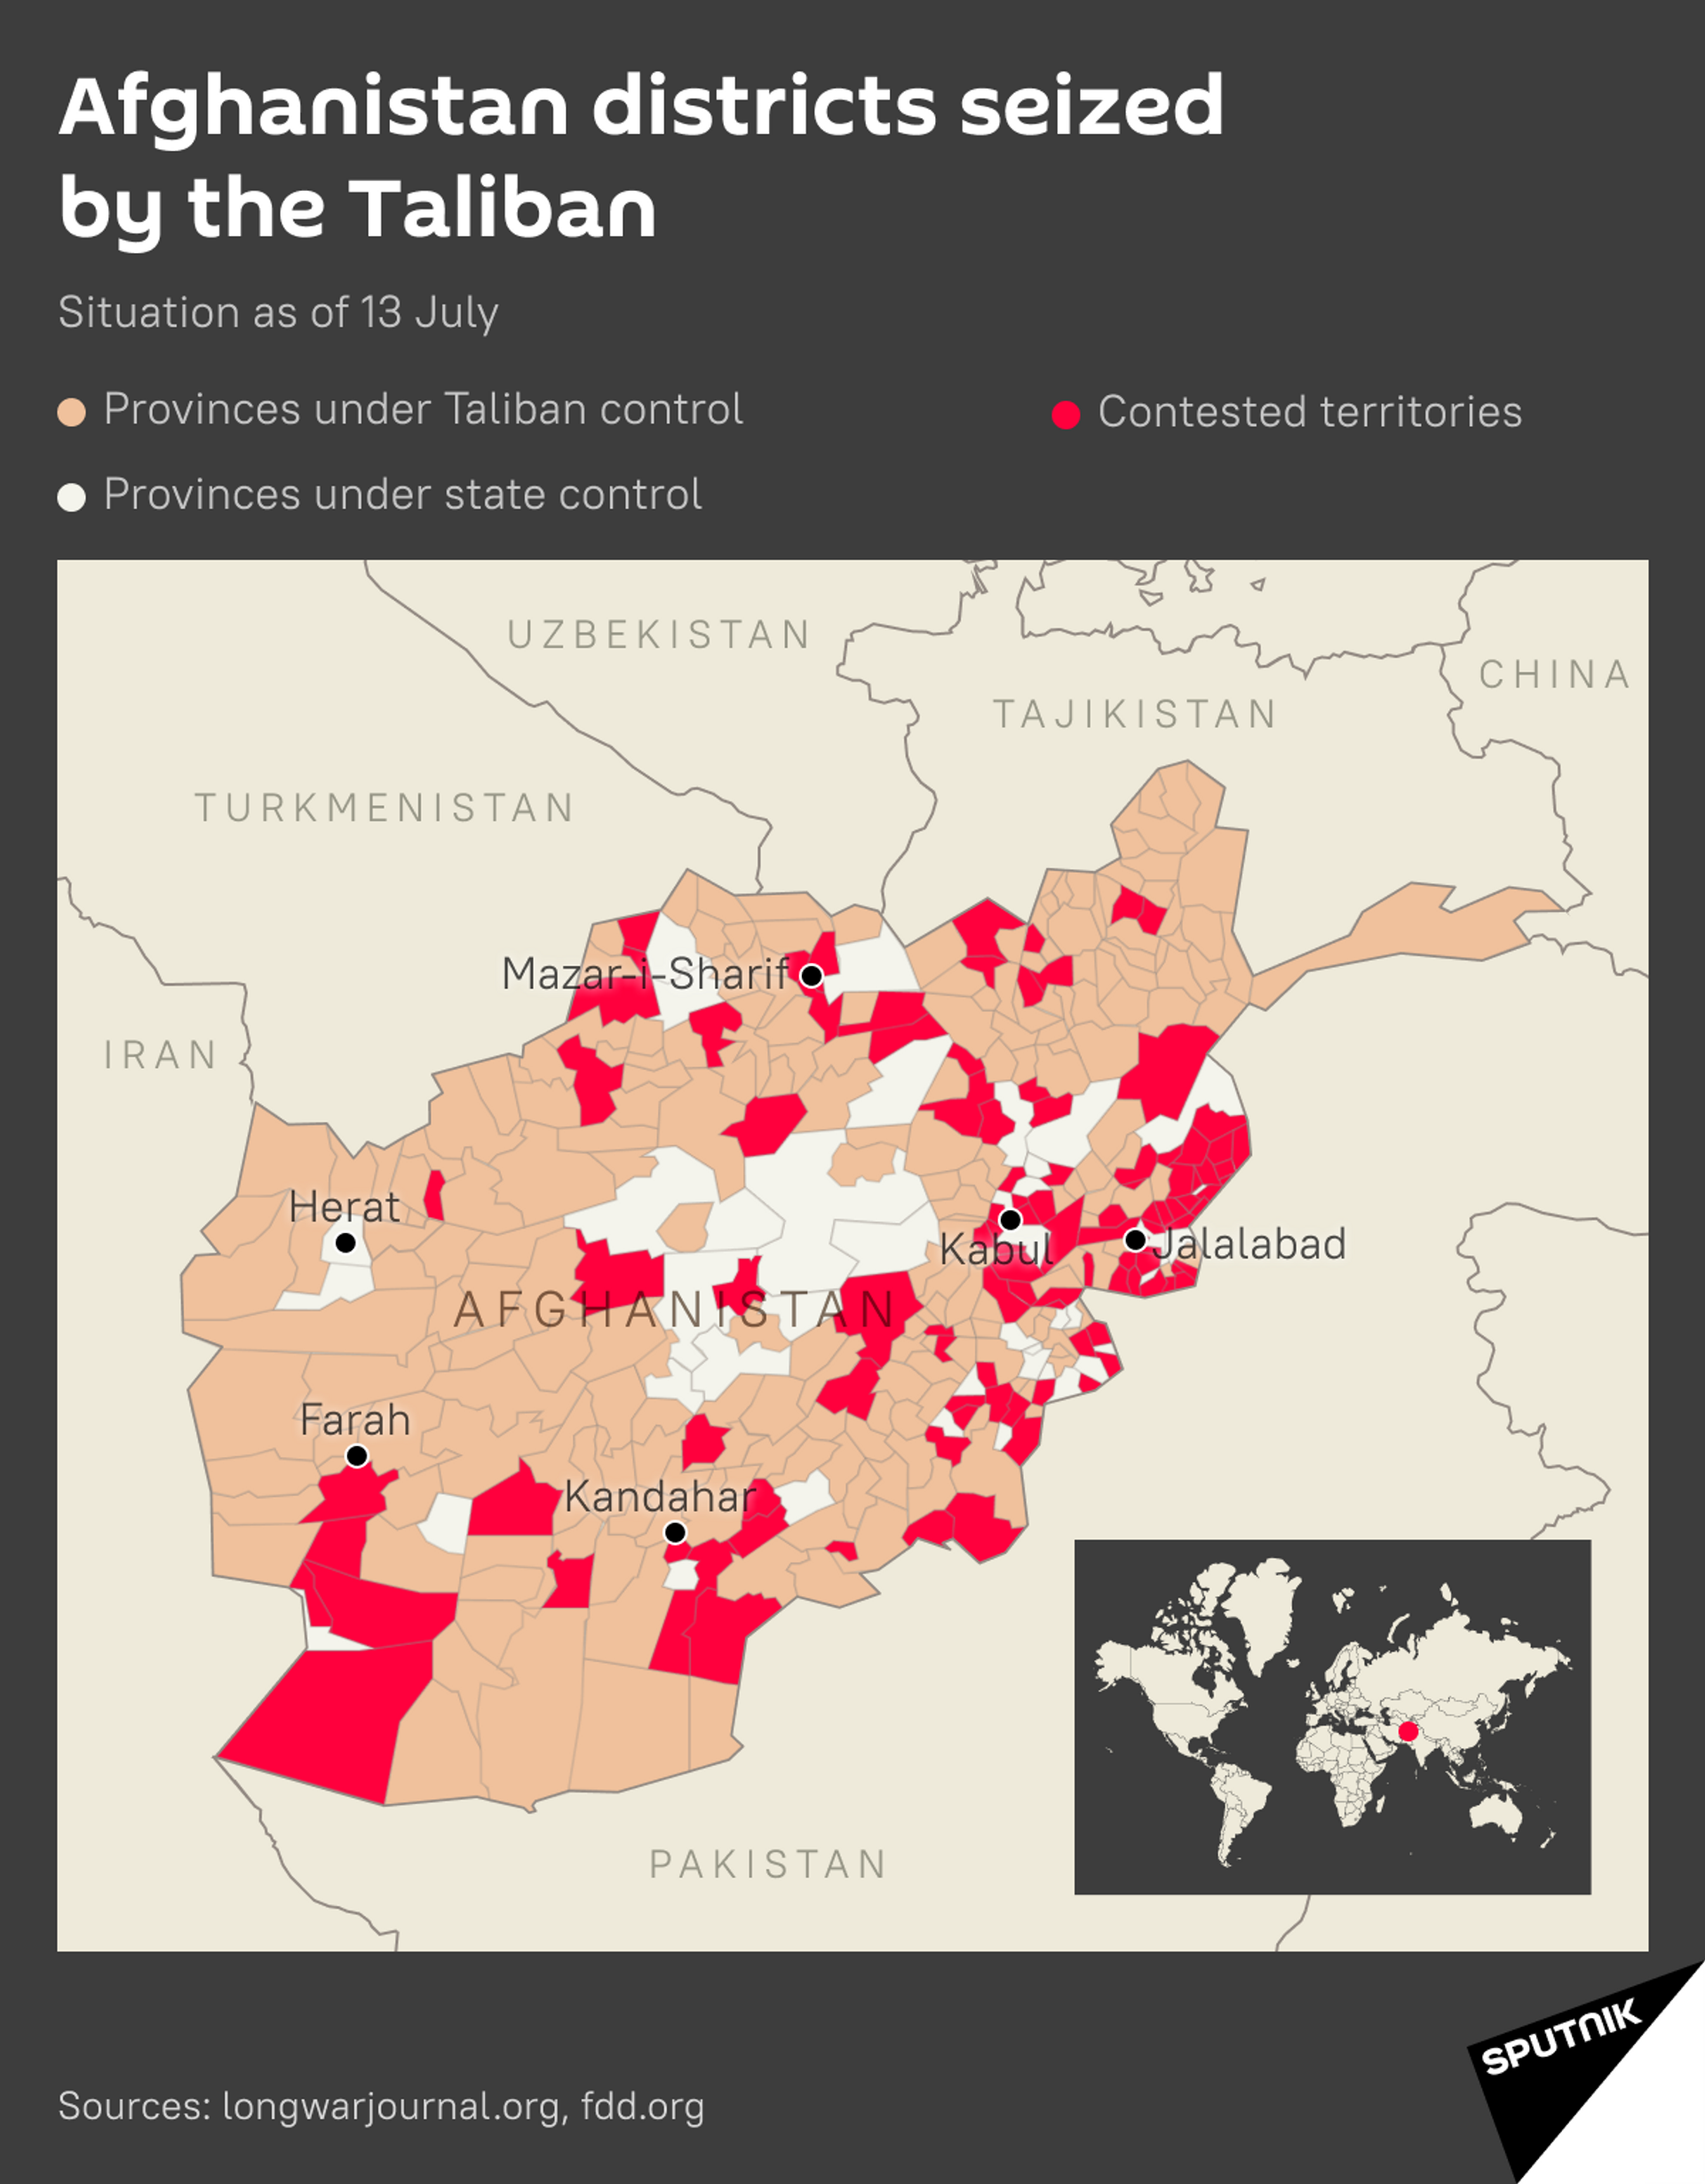 Afghan districts seized by the Taliban as of 13 July - Sputnik International, 1920, 07.09.2021